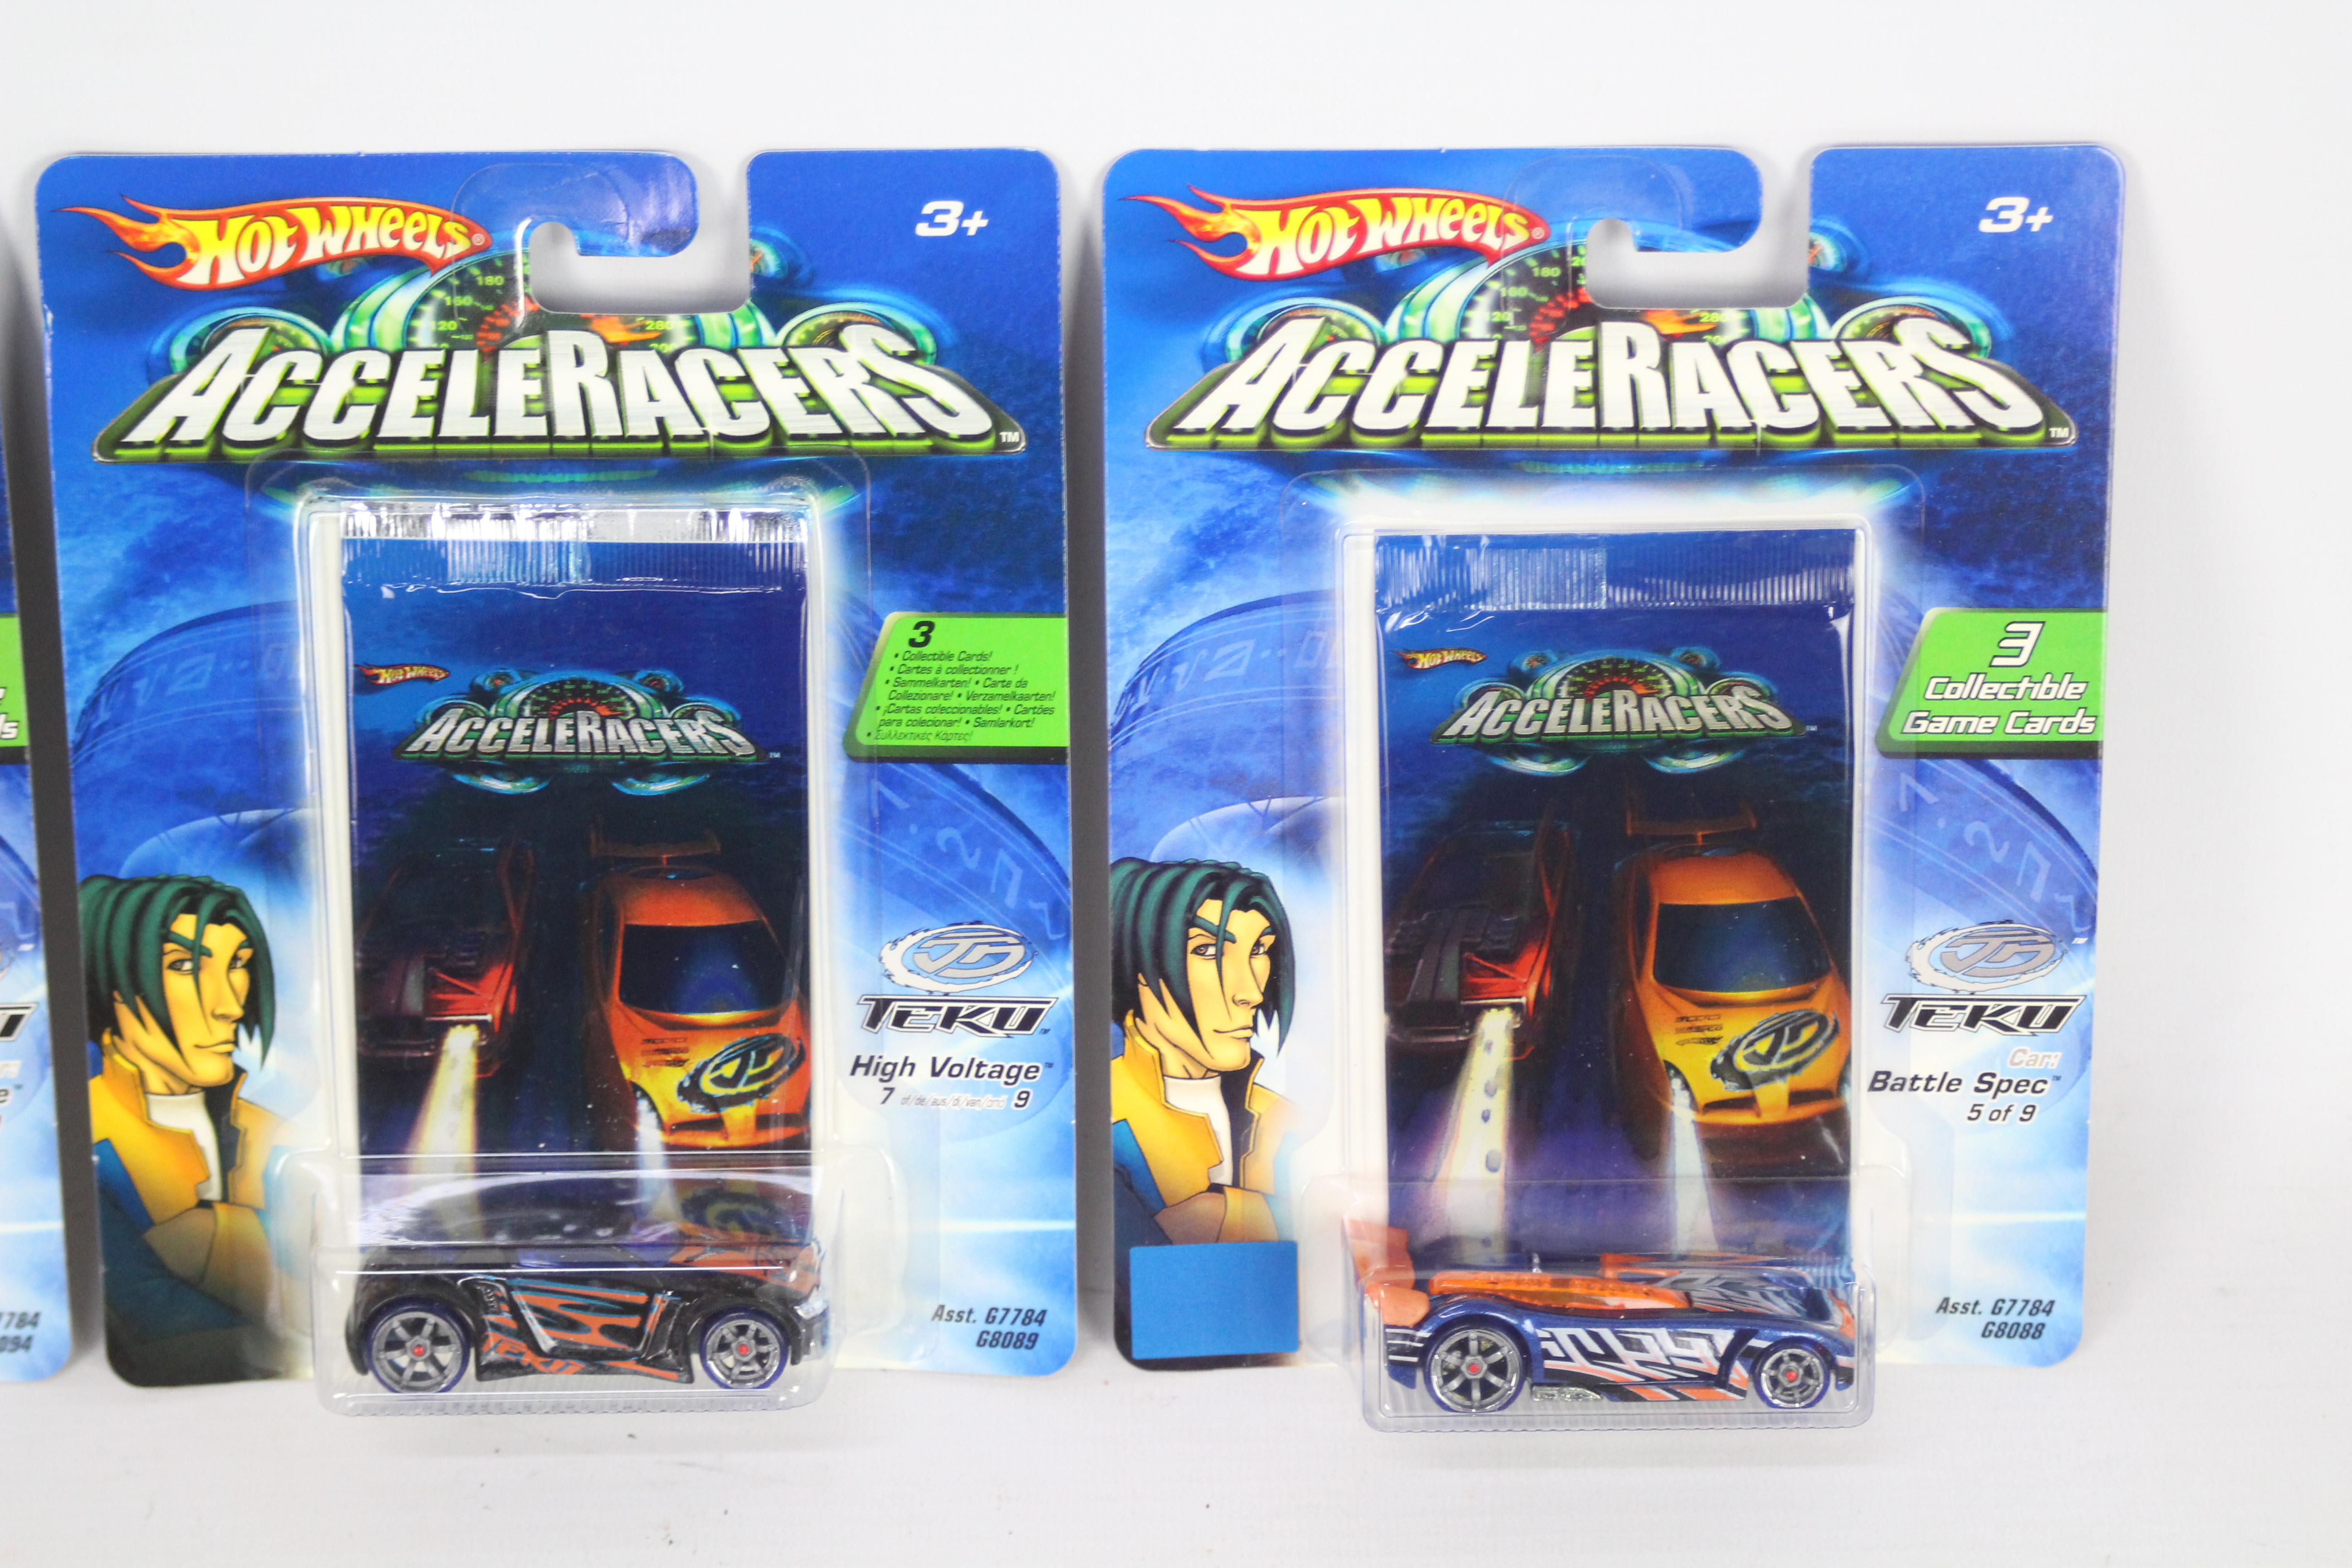 Hot Wheels - Acceleracers - 4 x unopened models from the Teku range, Reverb # G8095, - Image 3 of 3